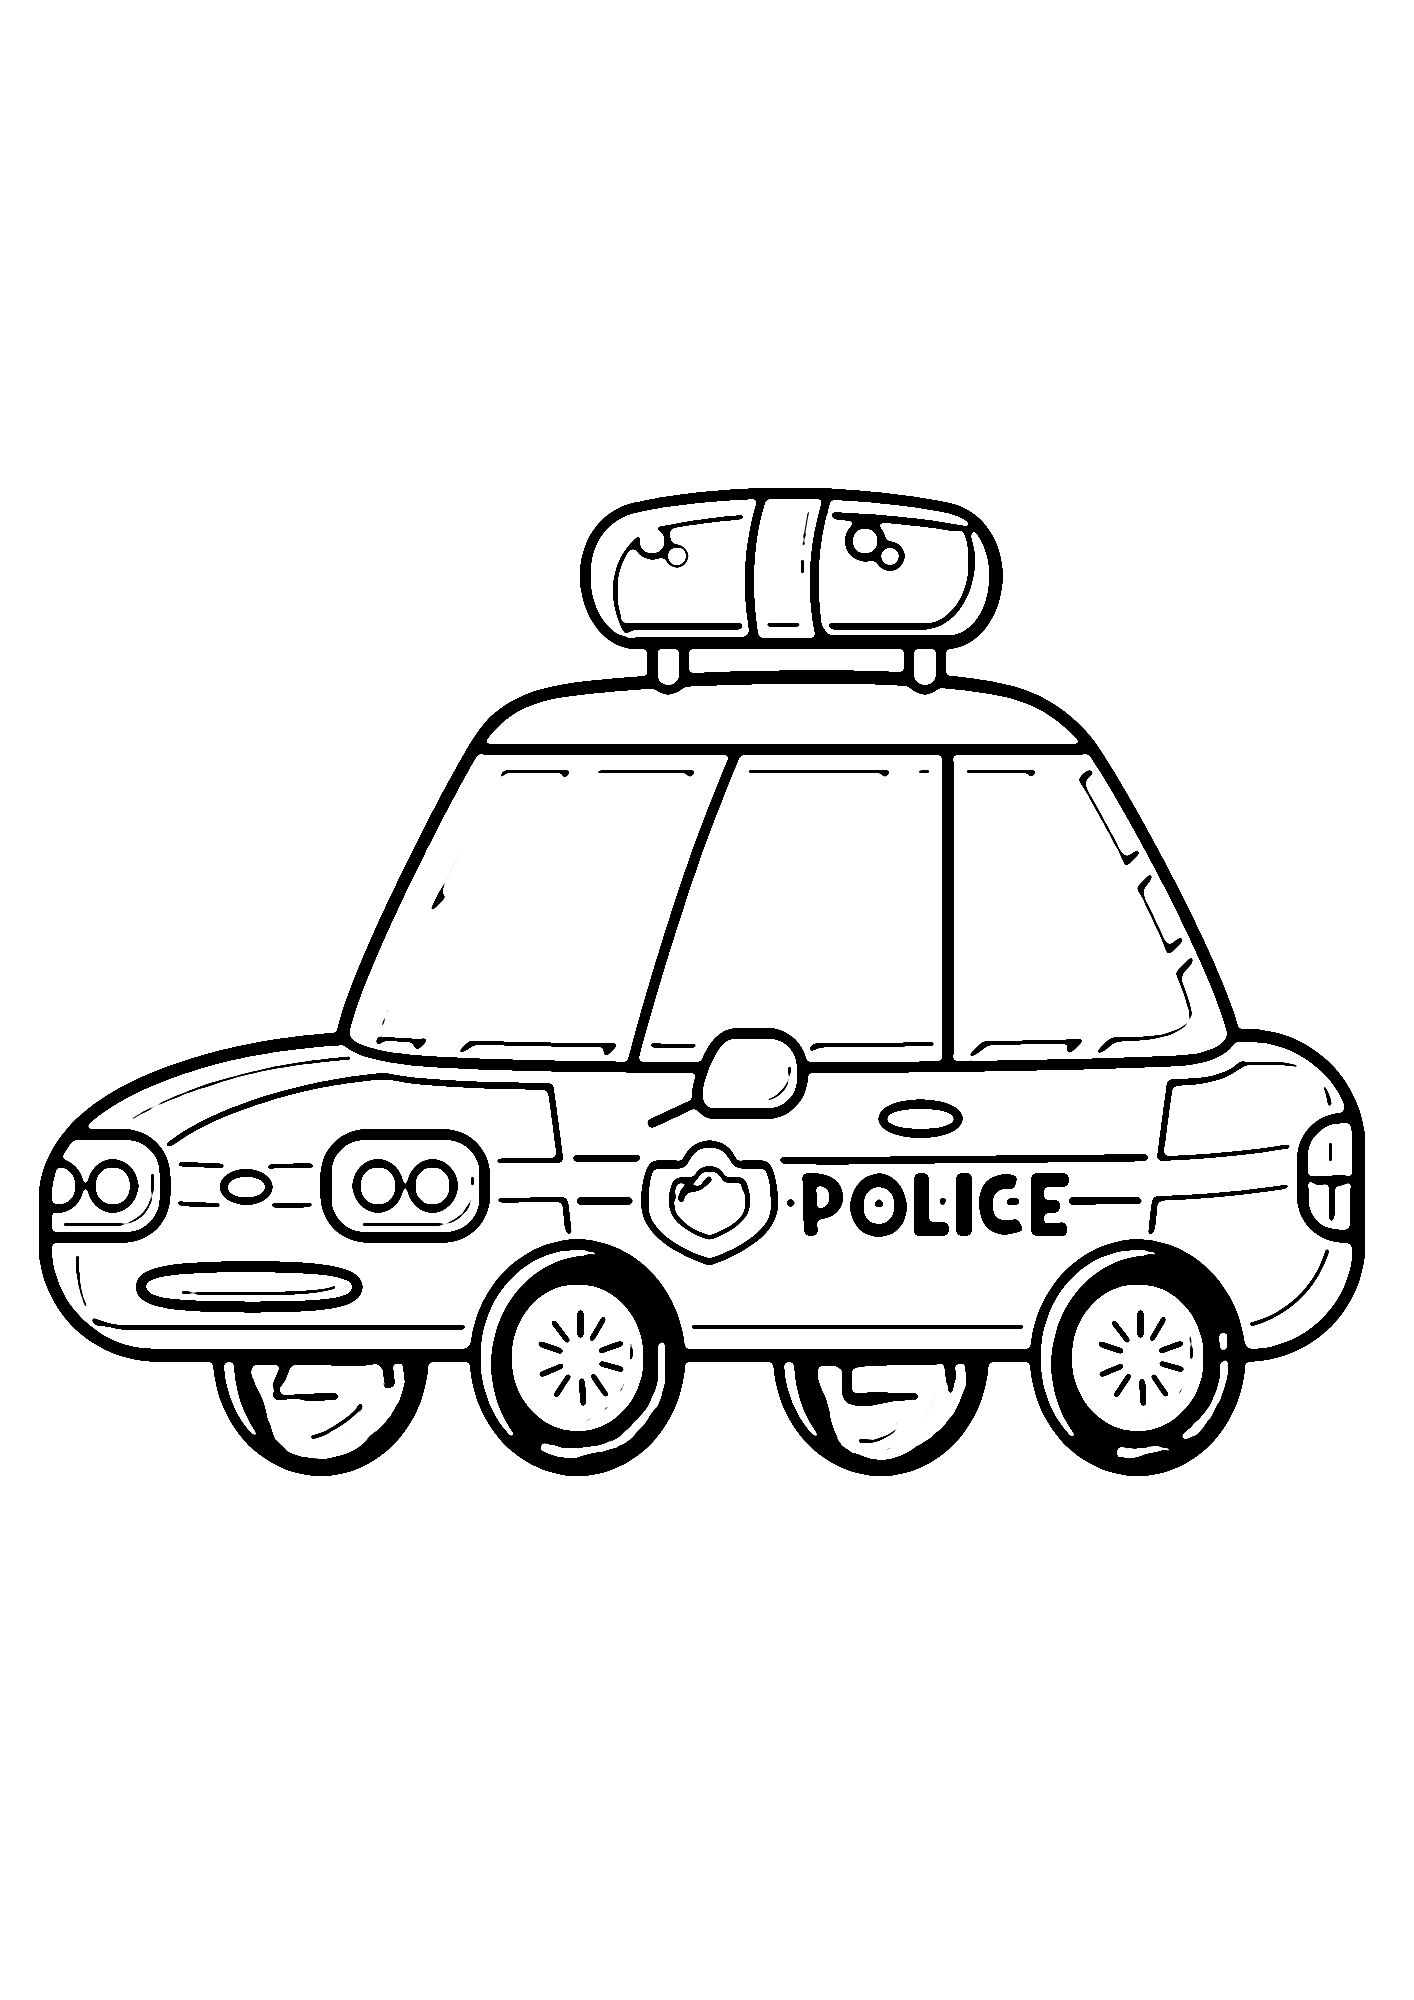 Police Car Picture Coloring Pages